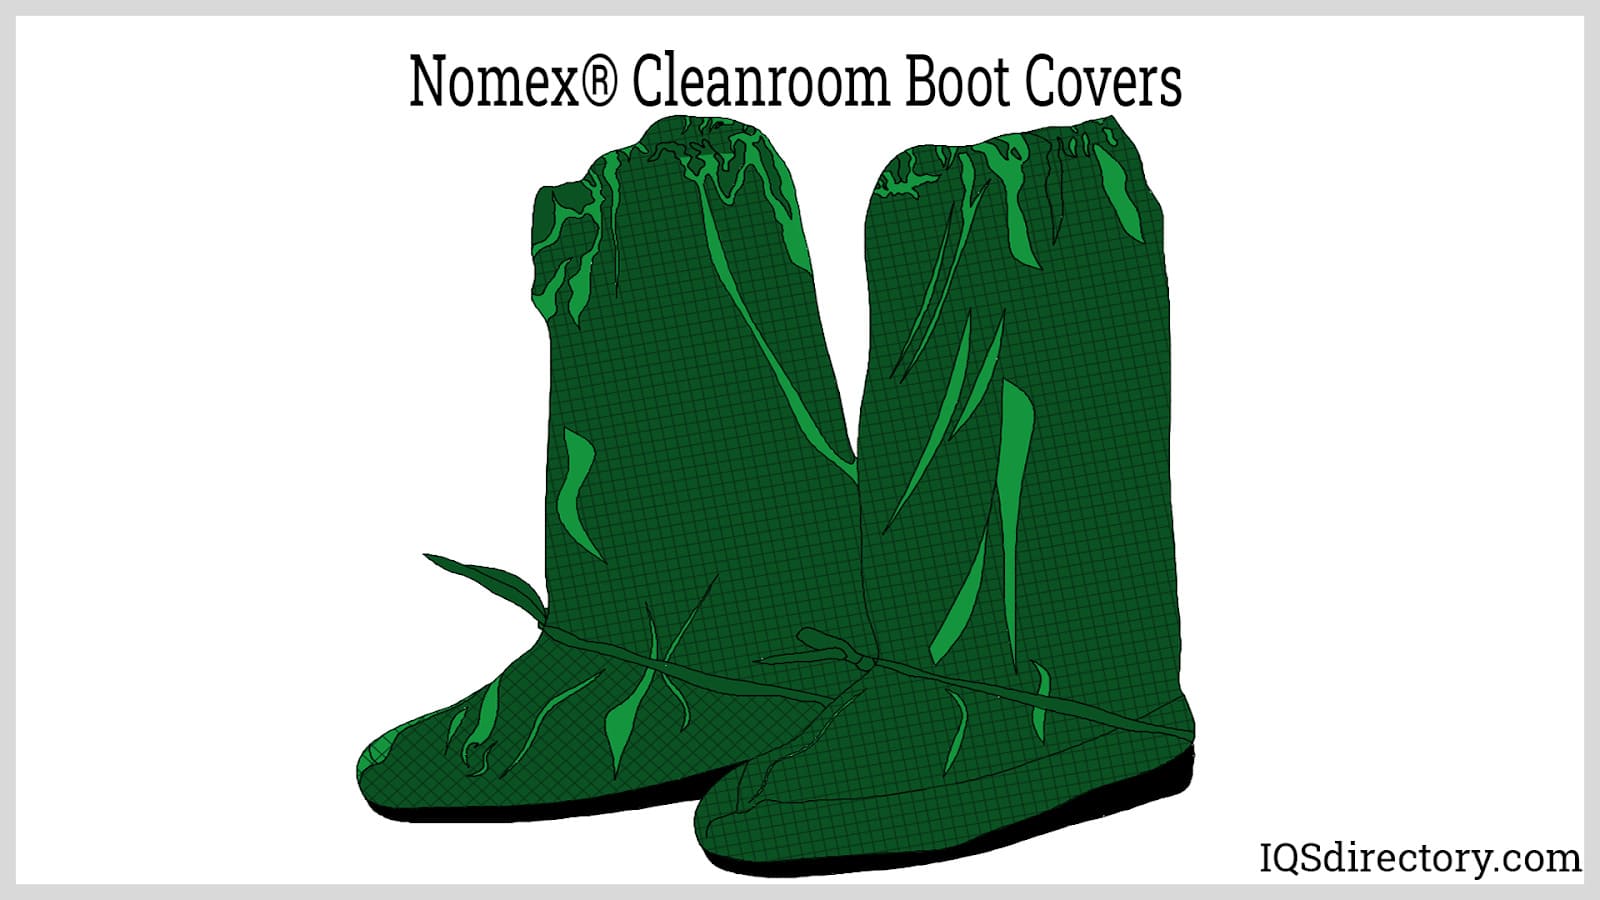 Nomex® Cleanroom Boot Covers